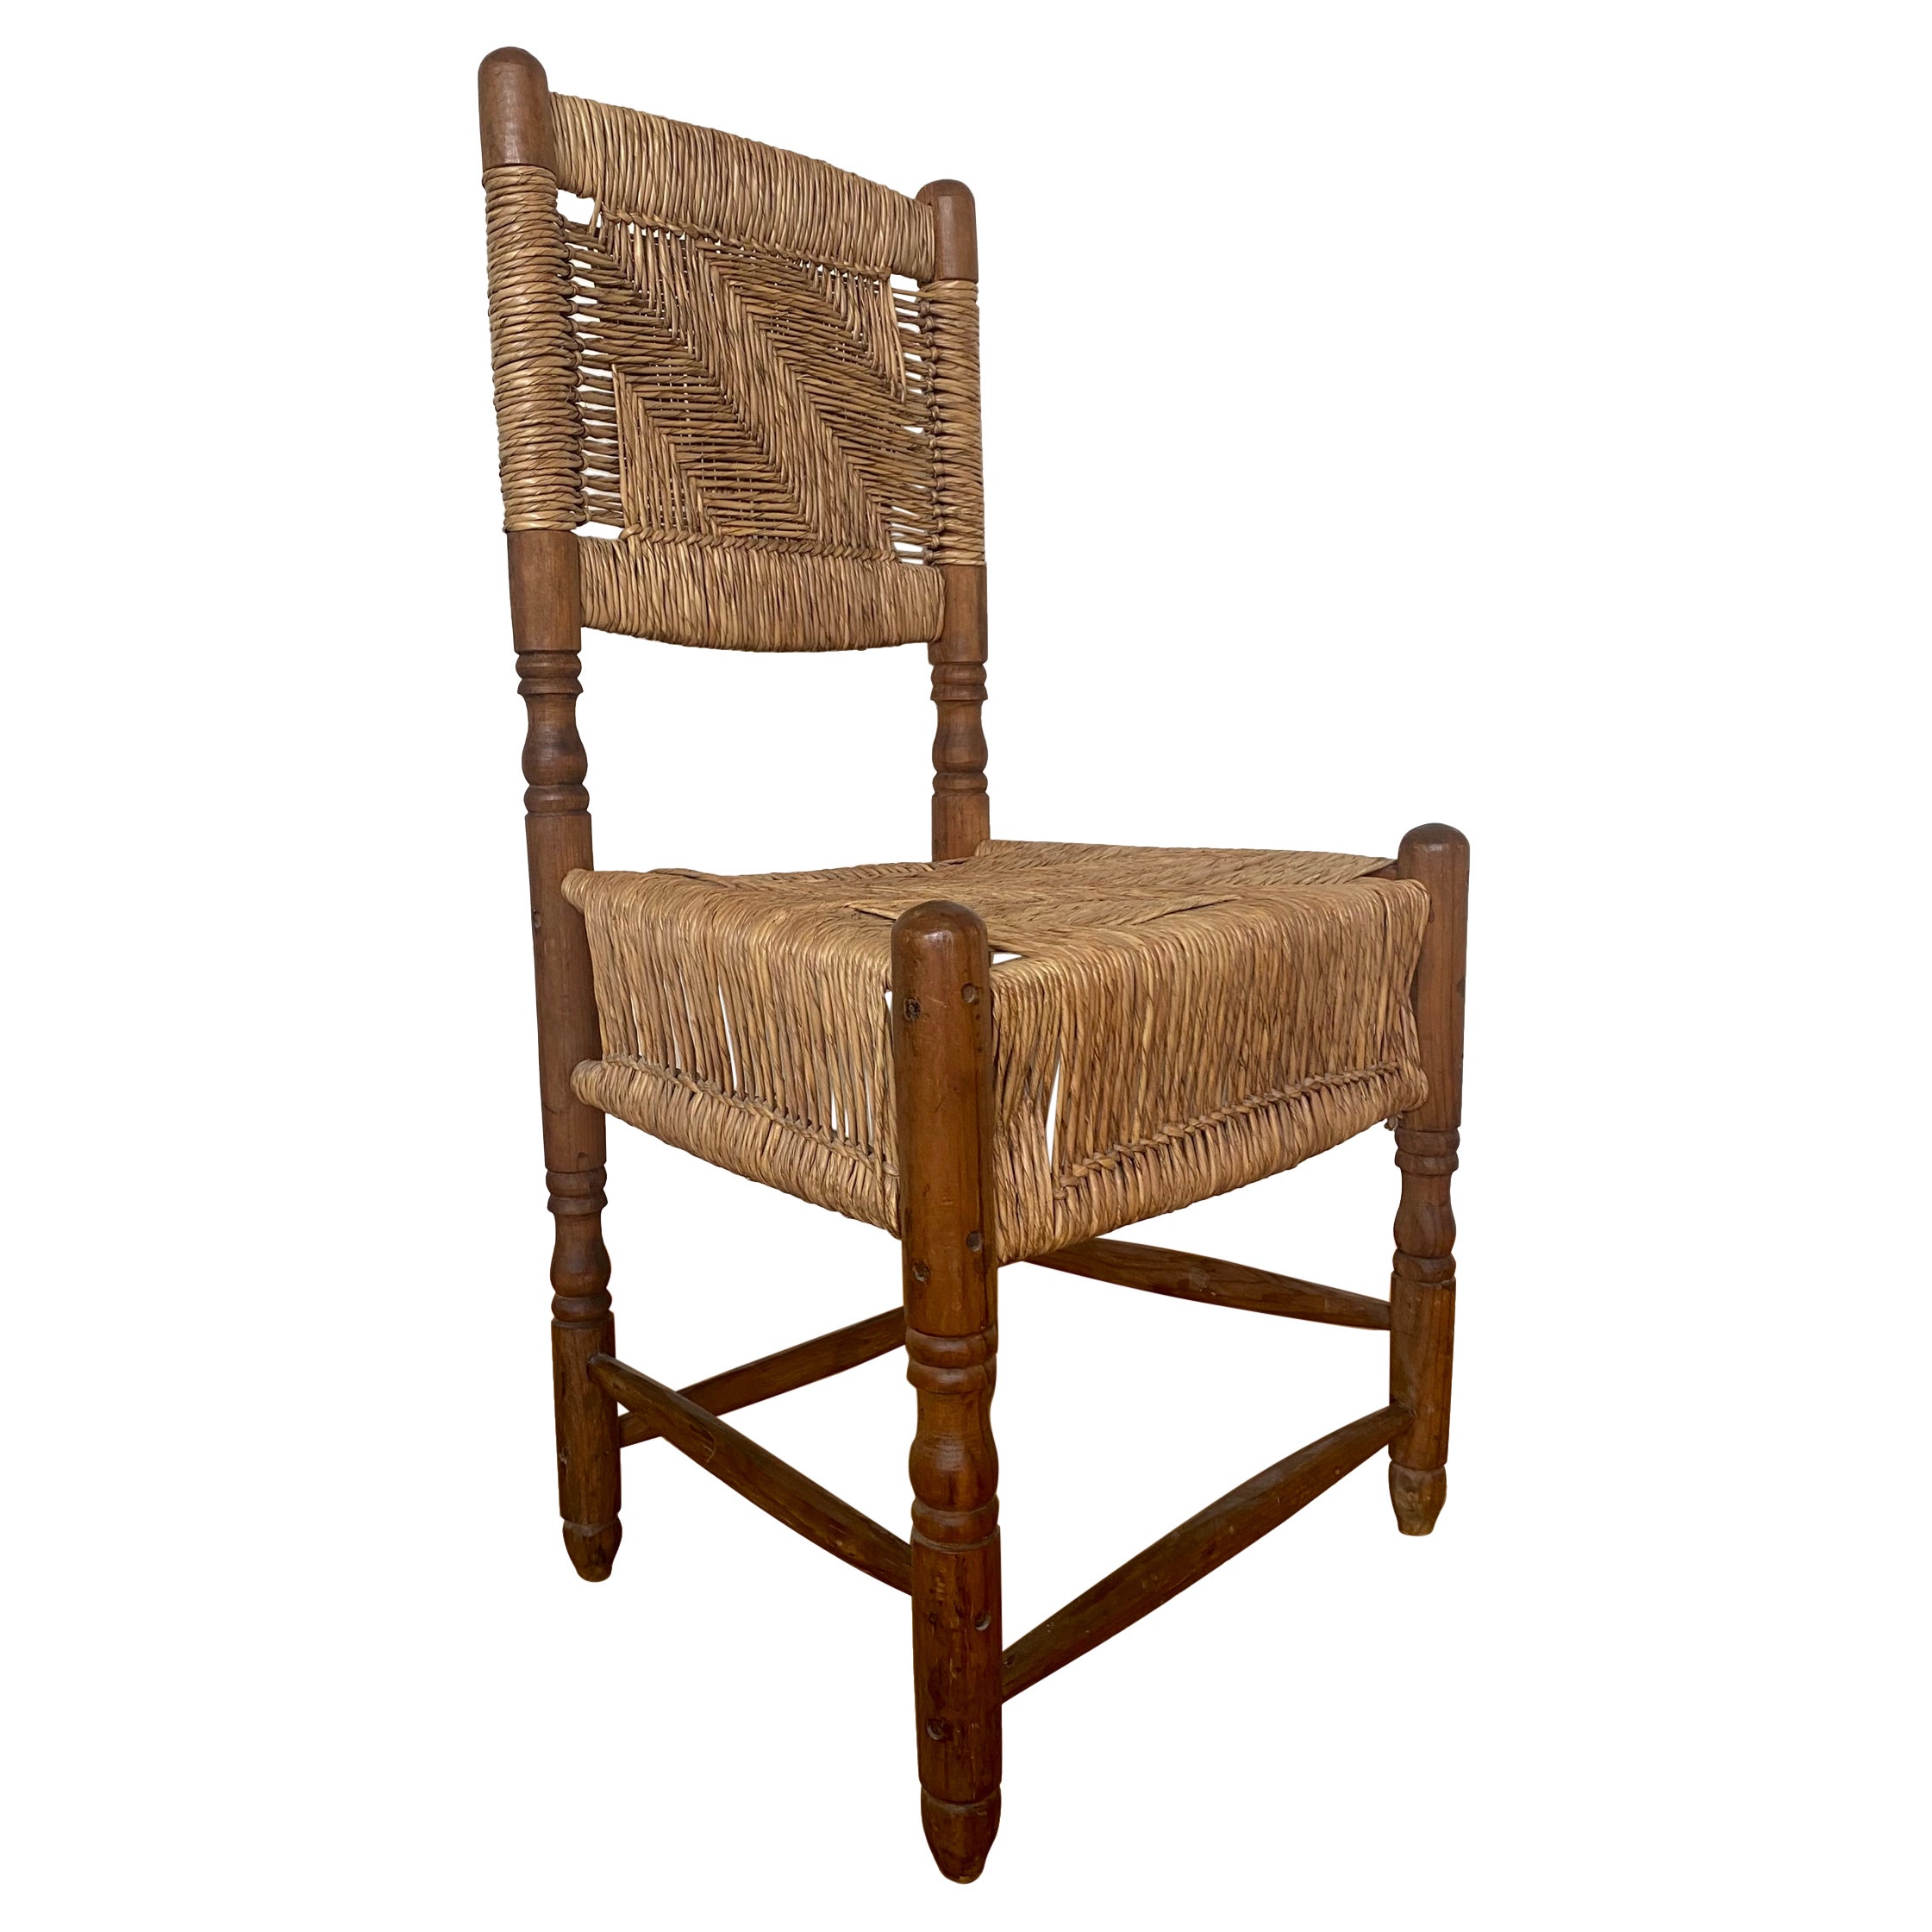 North American Rustic, Vintage, Wooden Chair with Woven Seat For Sale